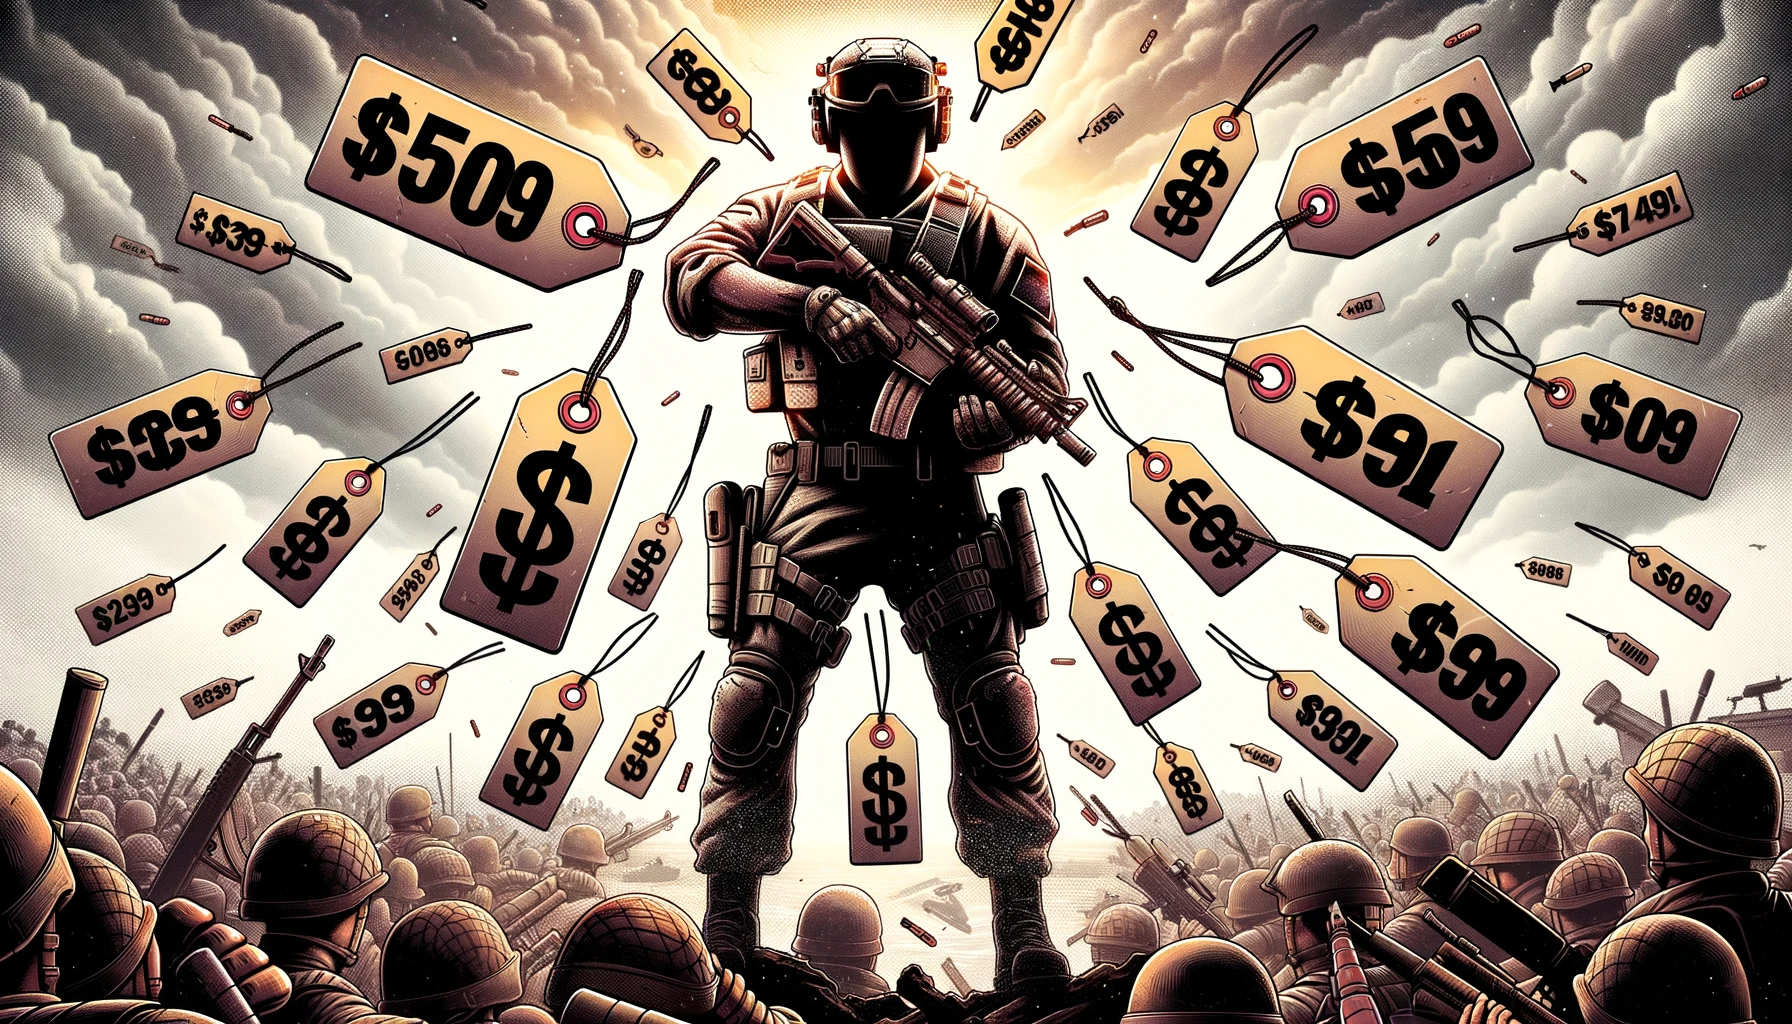 Illustration of a Call of Duty soldier standing tall in the middle, with price tags flying around like bullets, symbolizing the rising costs. The background is a detailed war scene from the game.